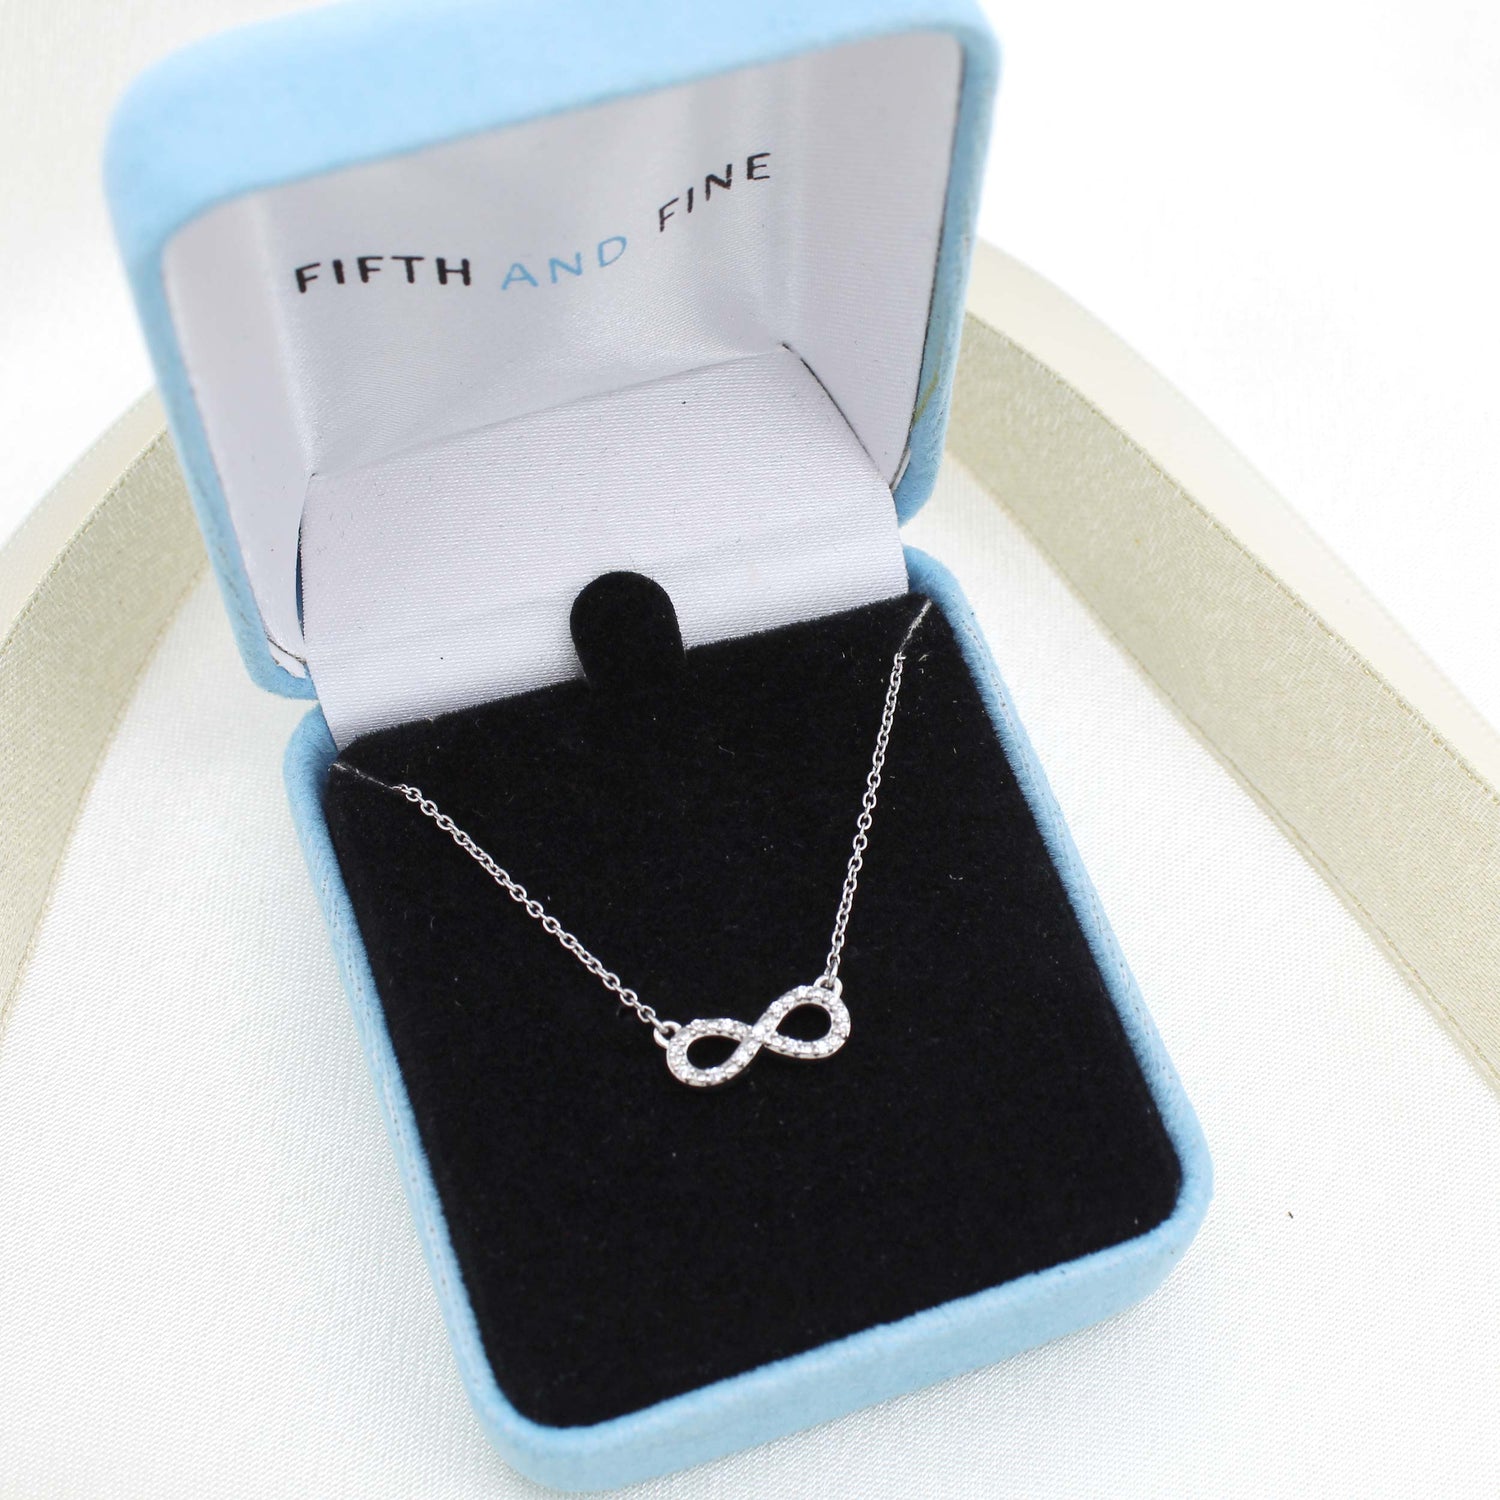 Infinity Forever Love 1/20 Cttw Natural Diamond Pendant Necklace set in 925 Sterling Silver